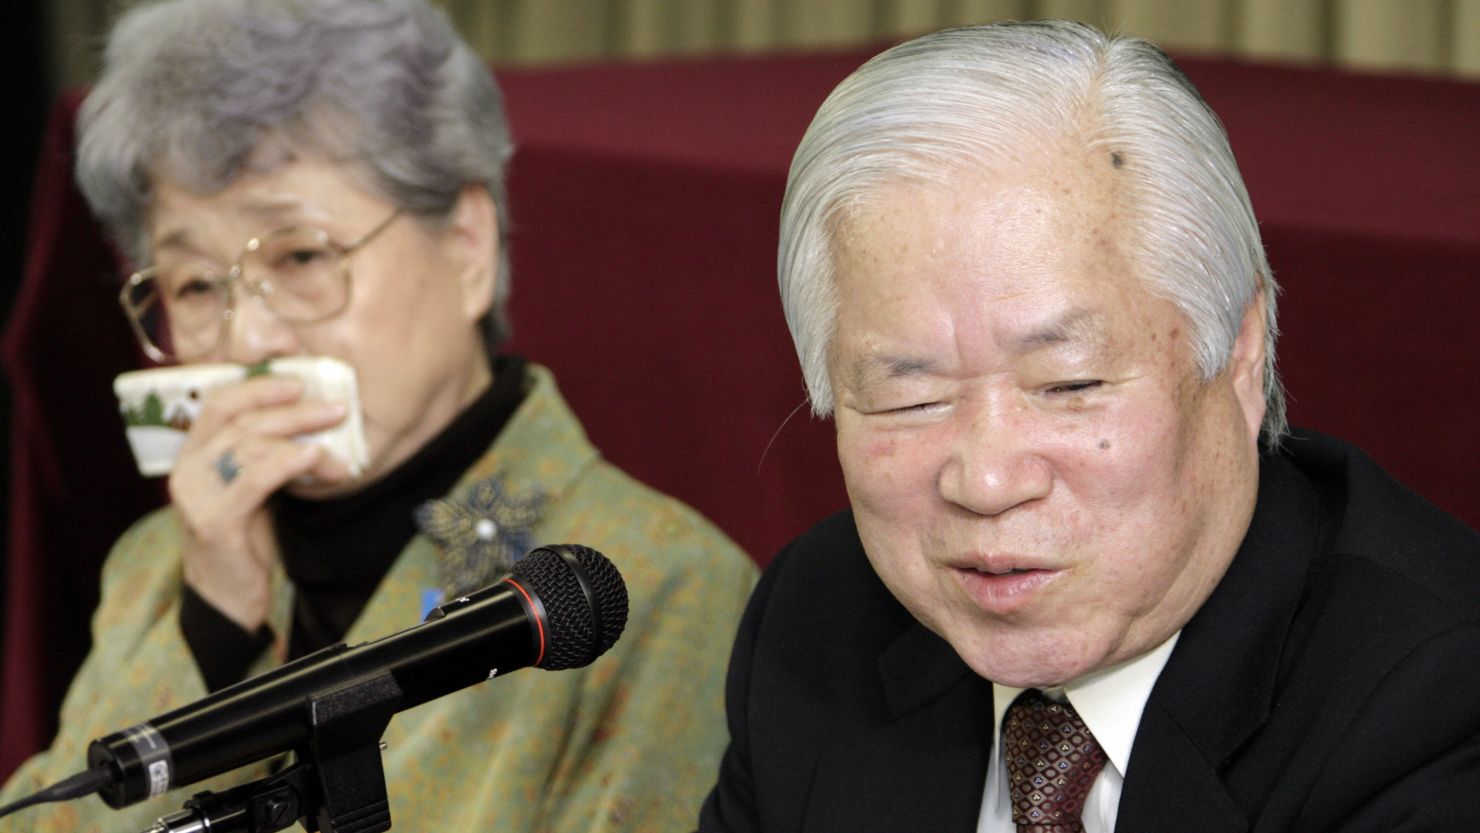 Sakie (l) and Shigeru Yokota, seen in this 2007 photograph, traveled to Mongolia to meet their granddaughter and her family